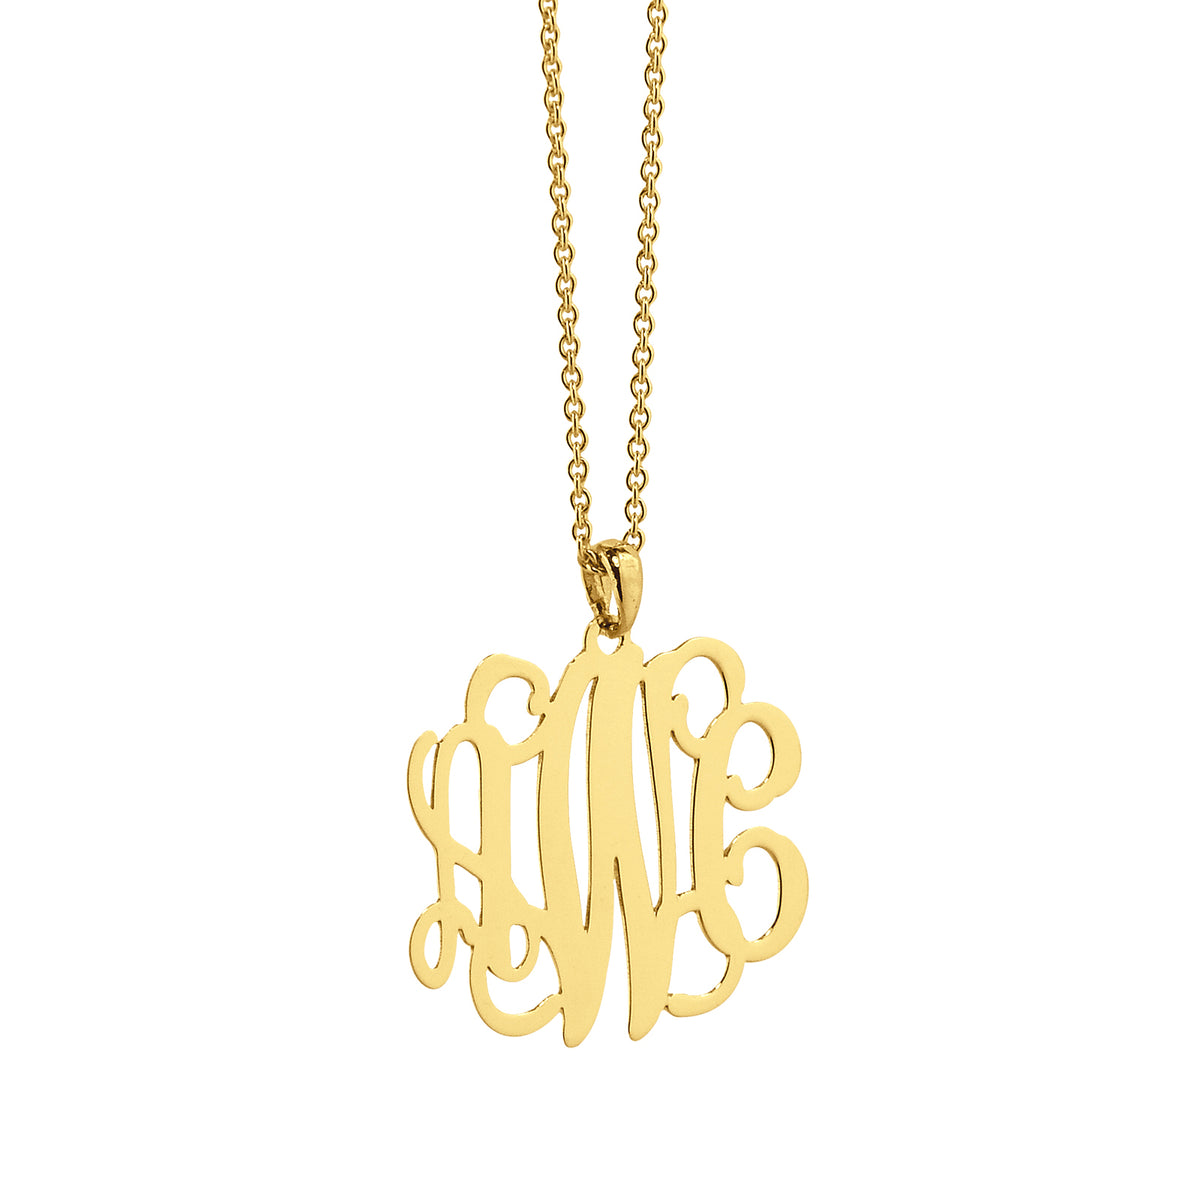 Small Solid 10k and 14k Gold 3 Initials Monogram Pendant .75 inch wide Personalized Charm Pendant